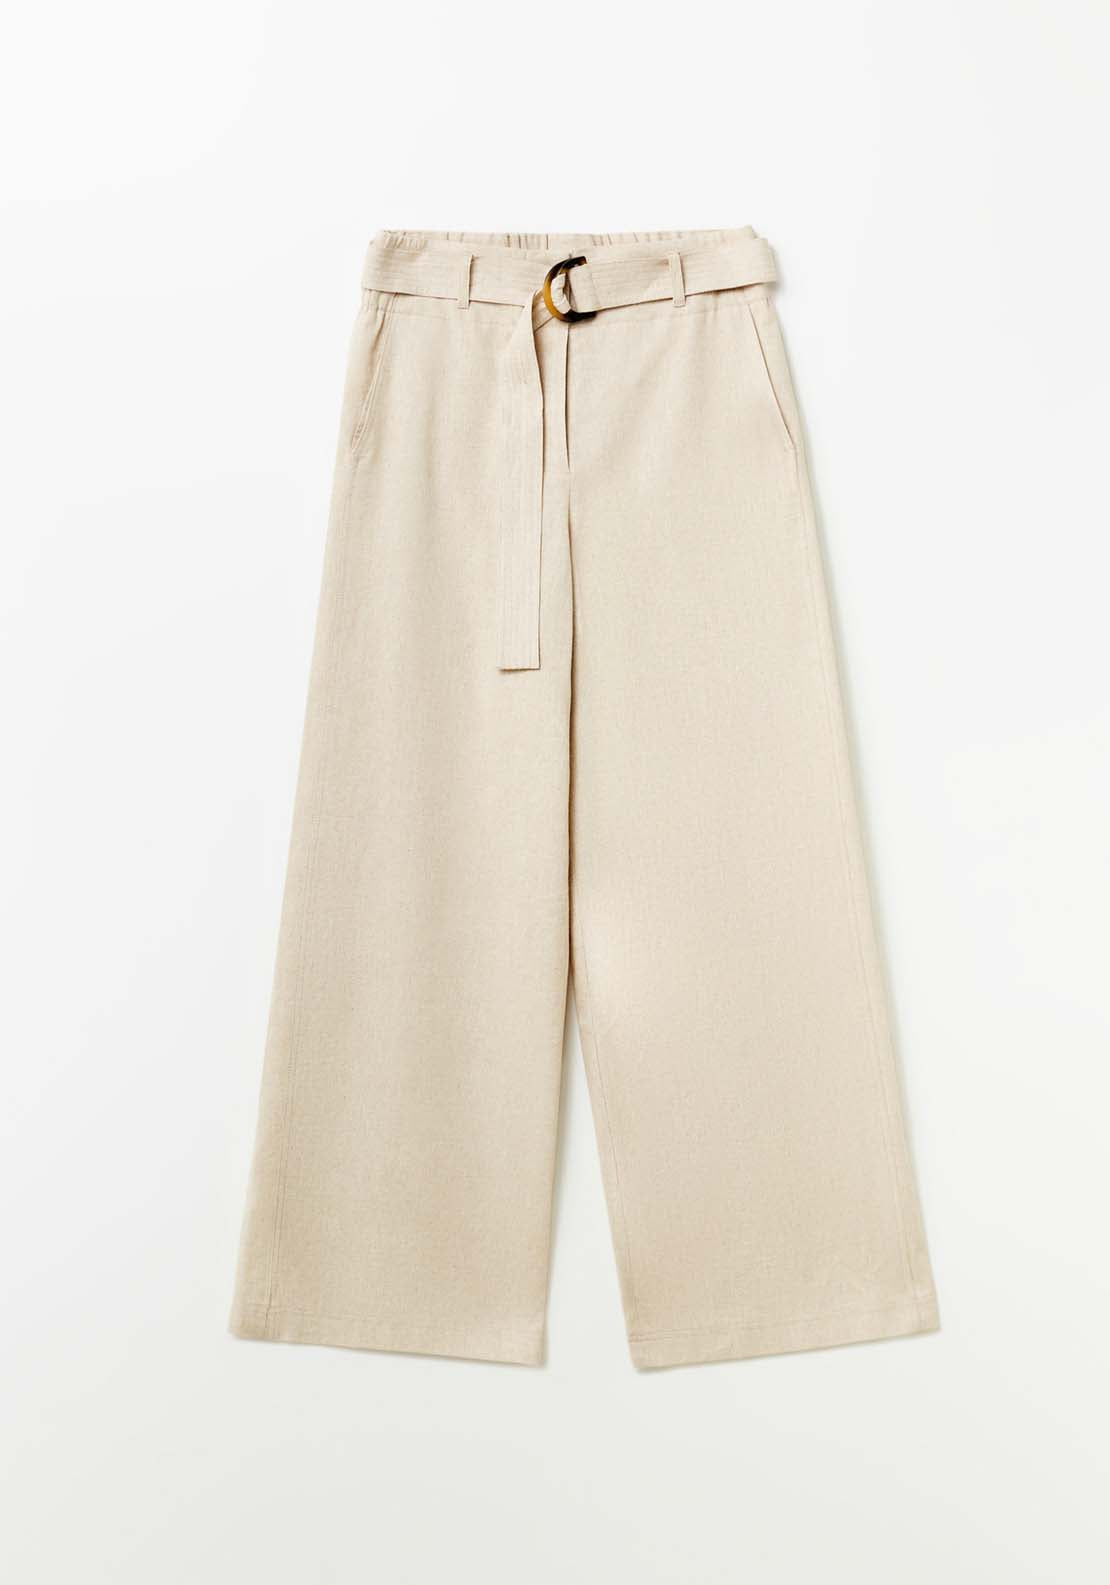 Sfera Belted linen trousers - Beige 7 Shaws Department Stores